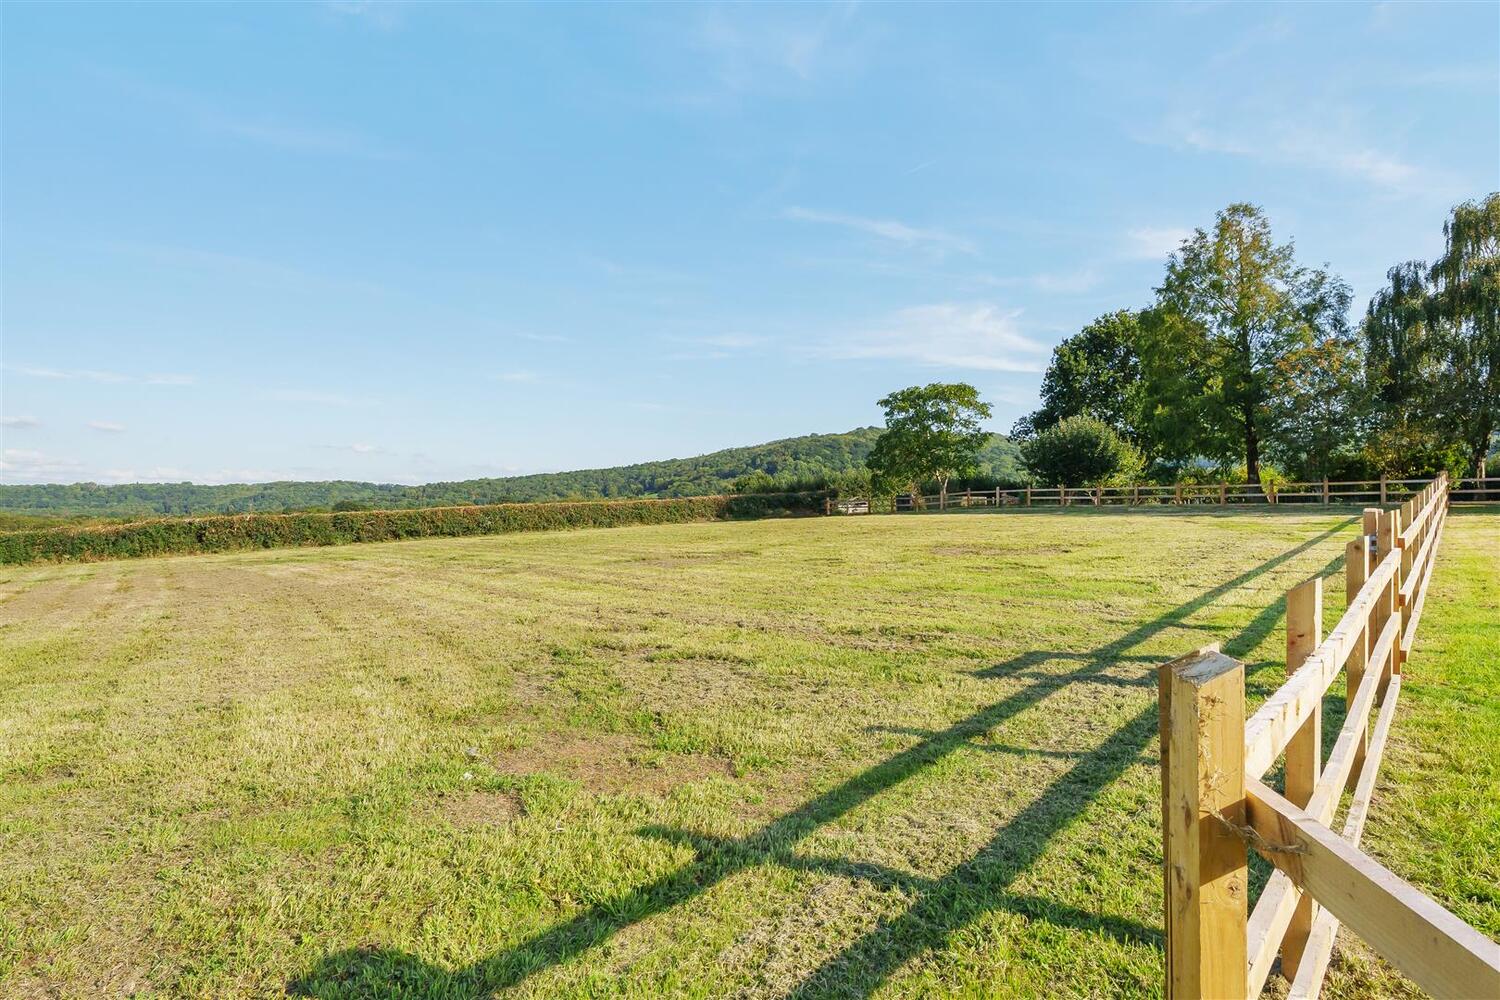 Blagdon Hill – 1 Acre in all – 3/4 bedrooms